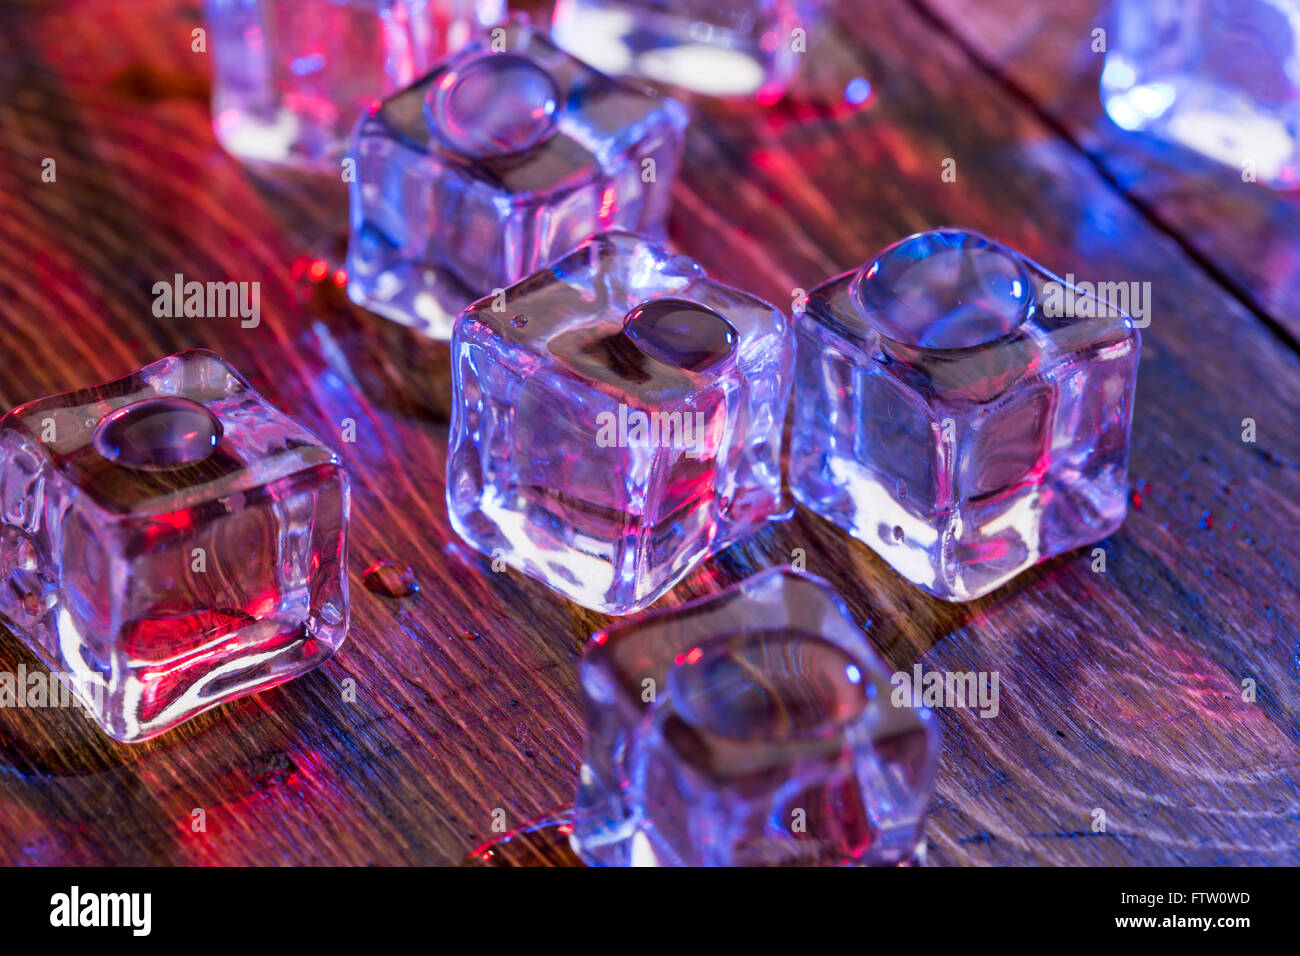 Cold and wet ice cubes with colorful light on wooden table Stock Photo